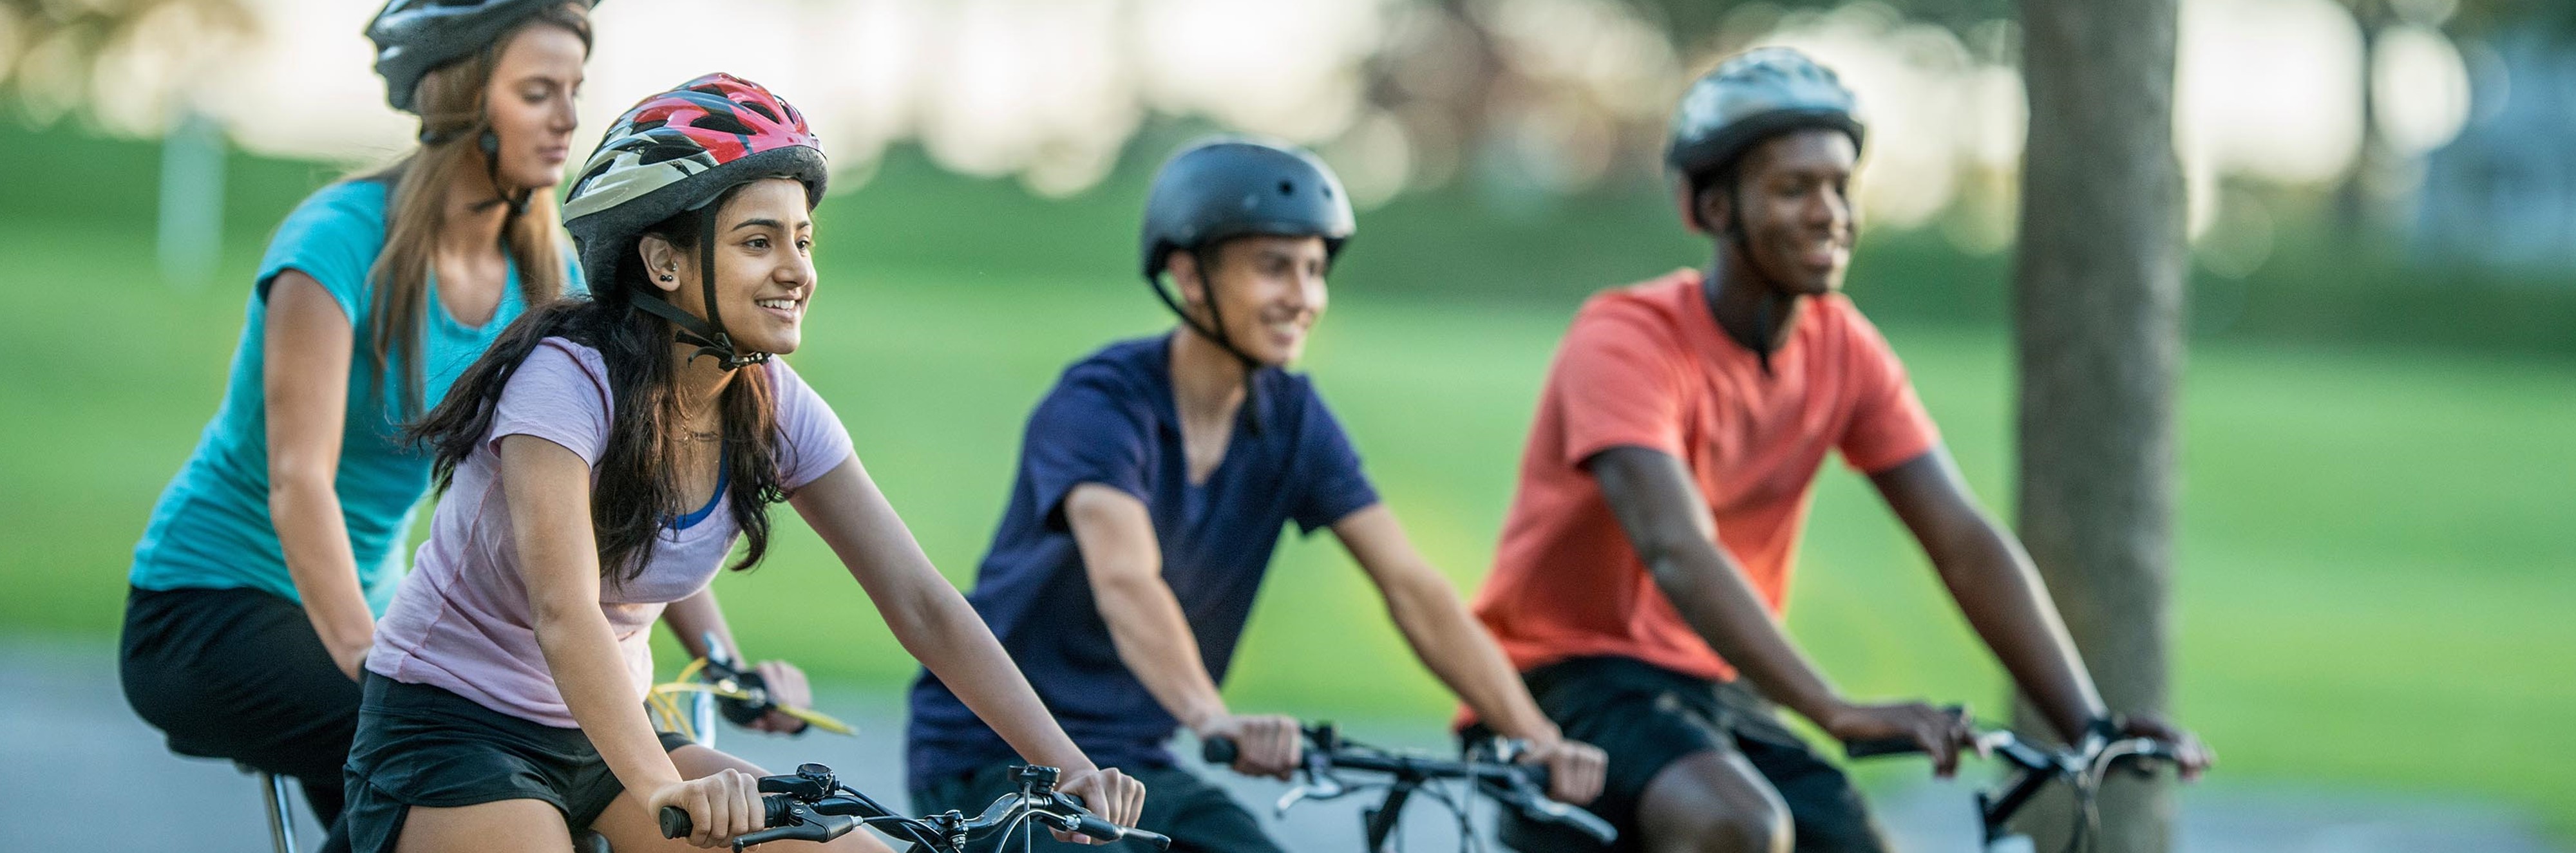 A group of teenagers smiling and riding bikes